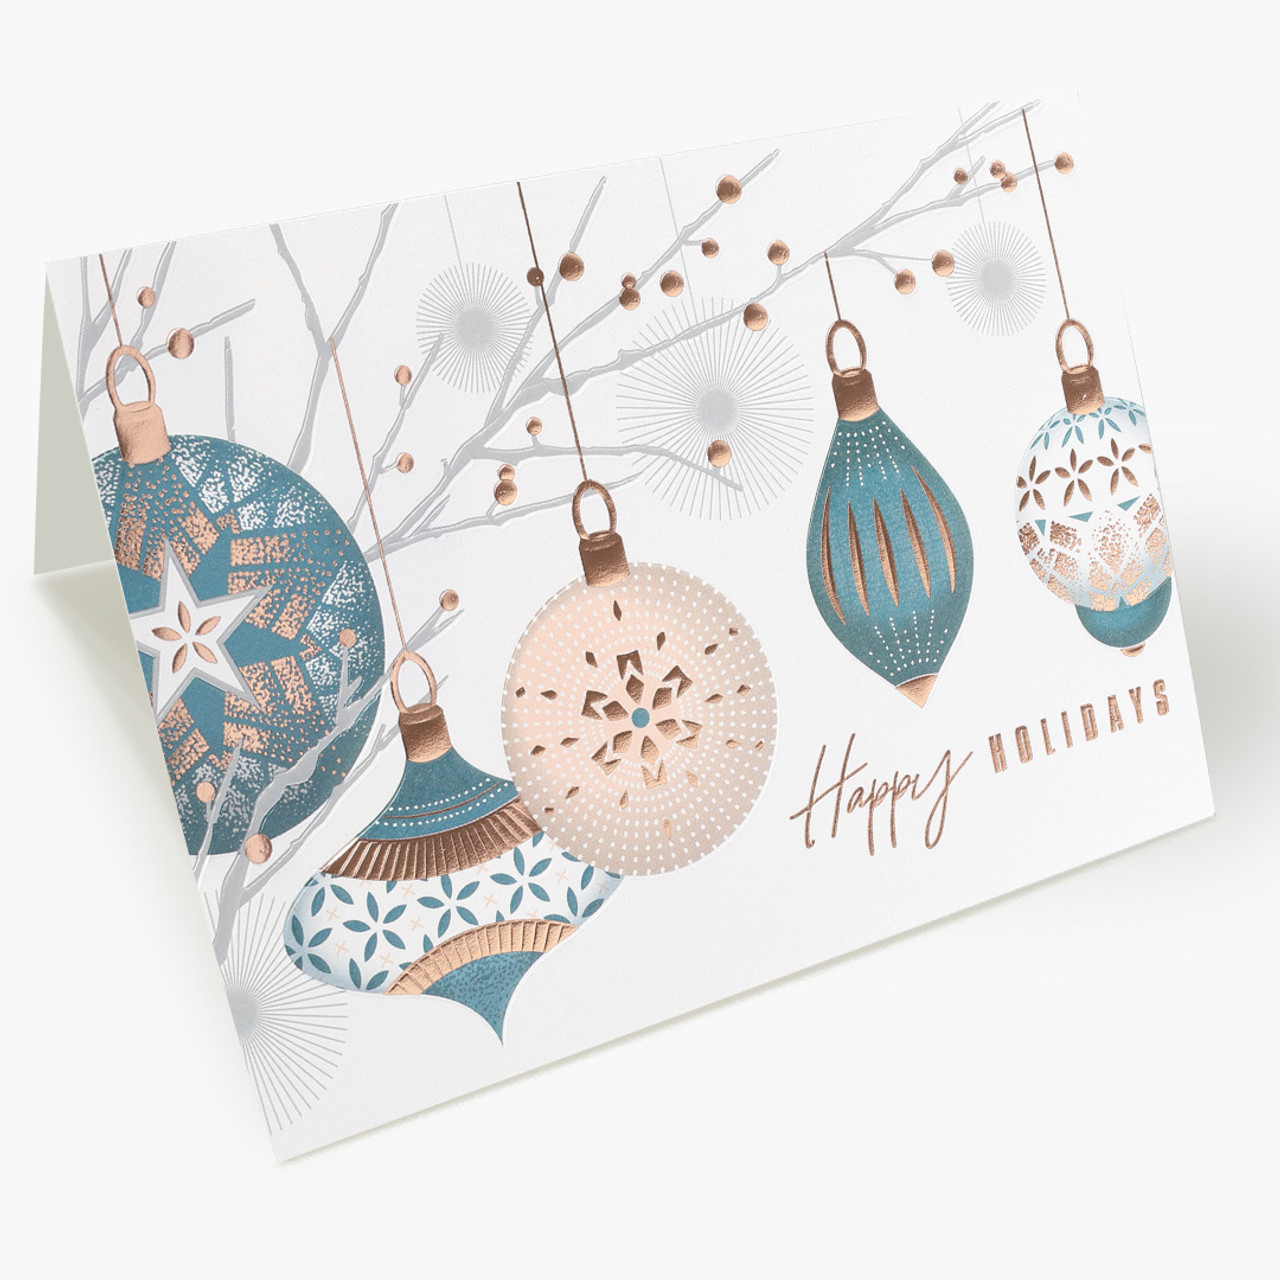 Copper and White Holiday Christmas Card